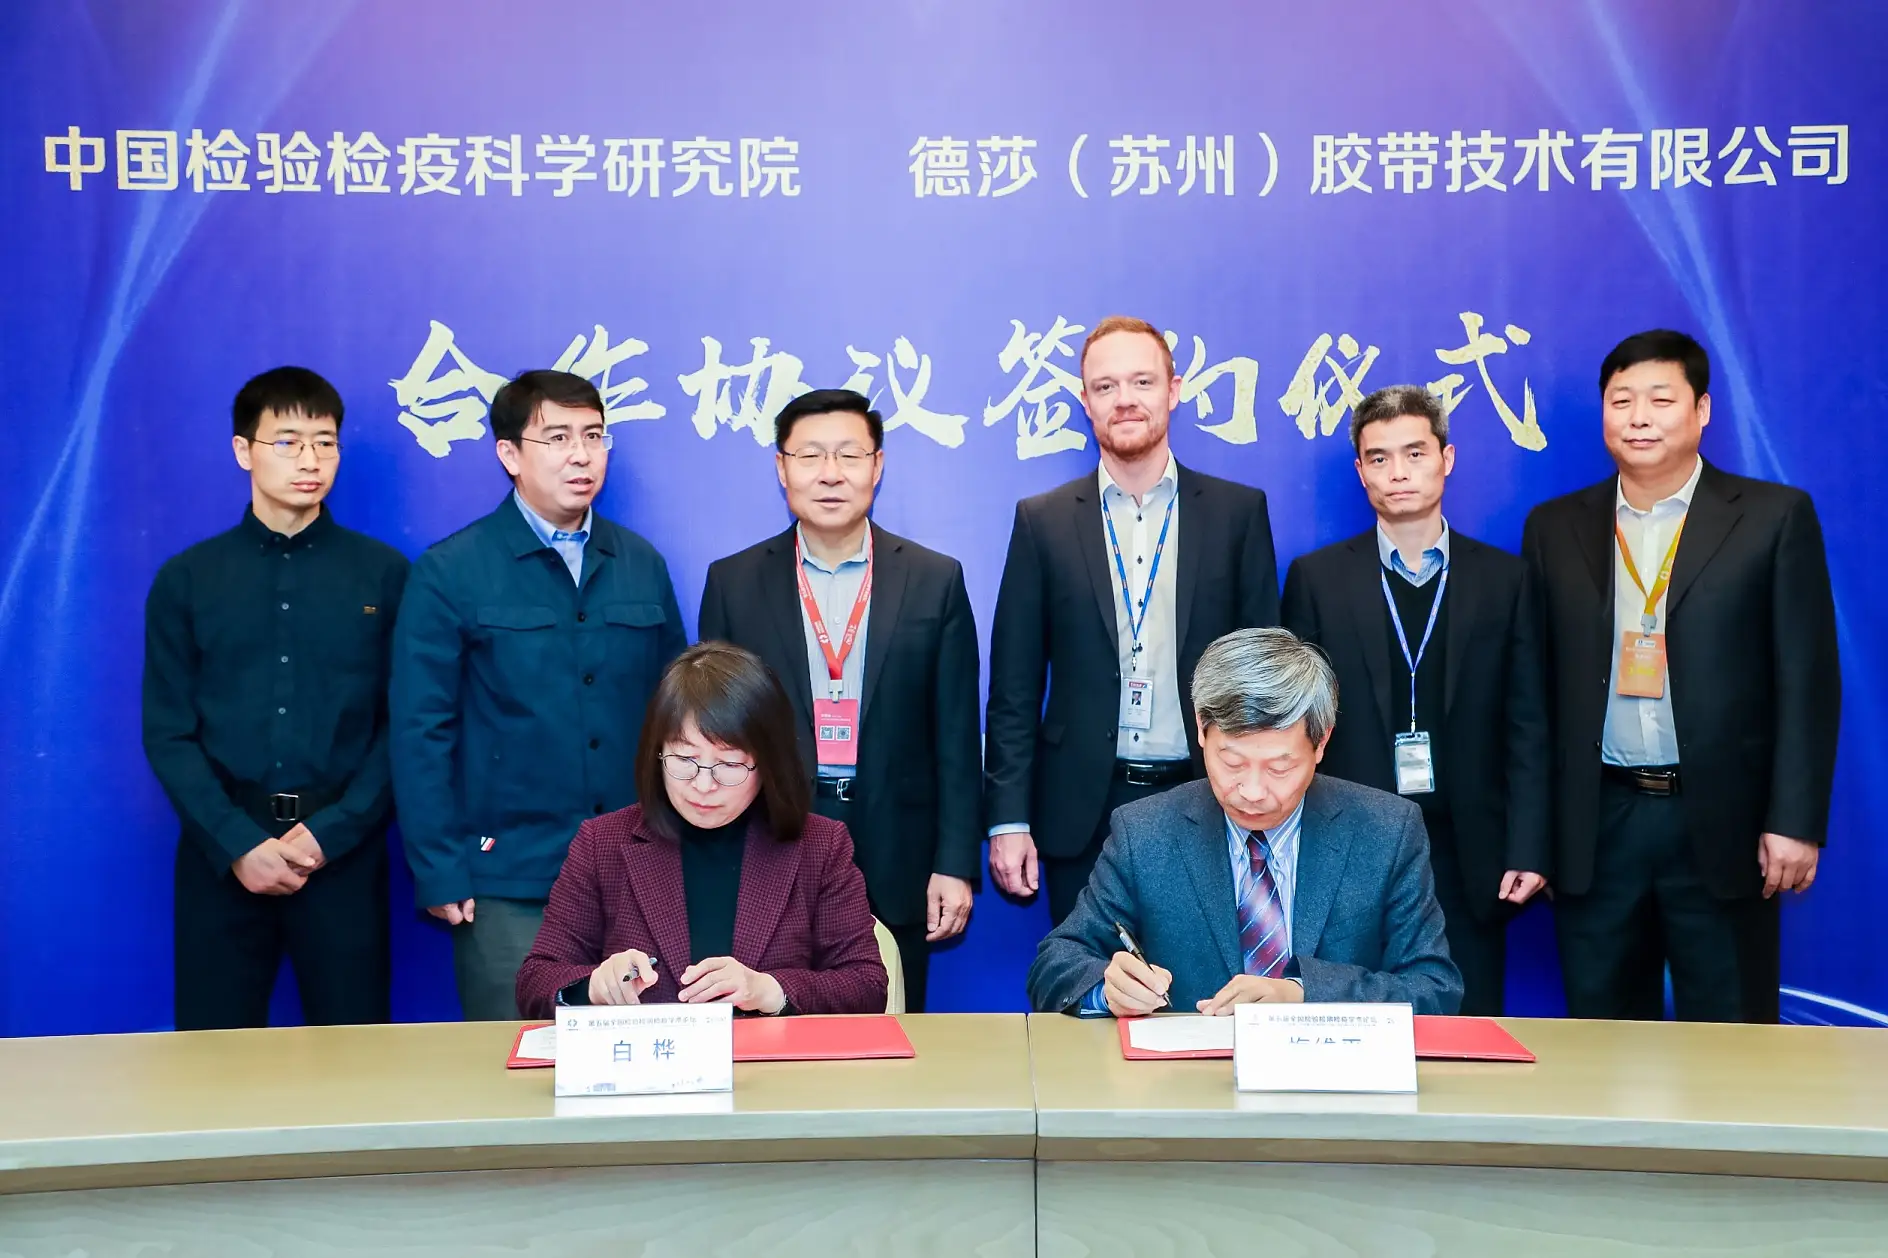 Agreement with the Chinese Academy for Inspection and Quarantine